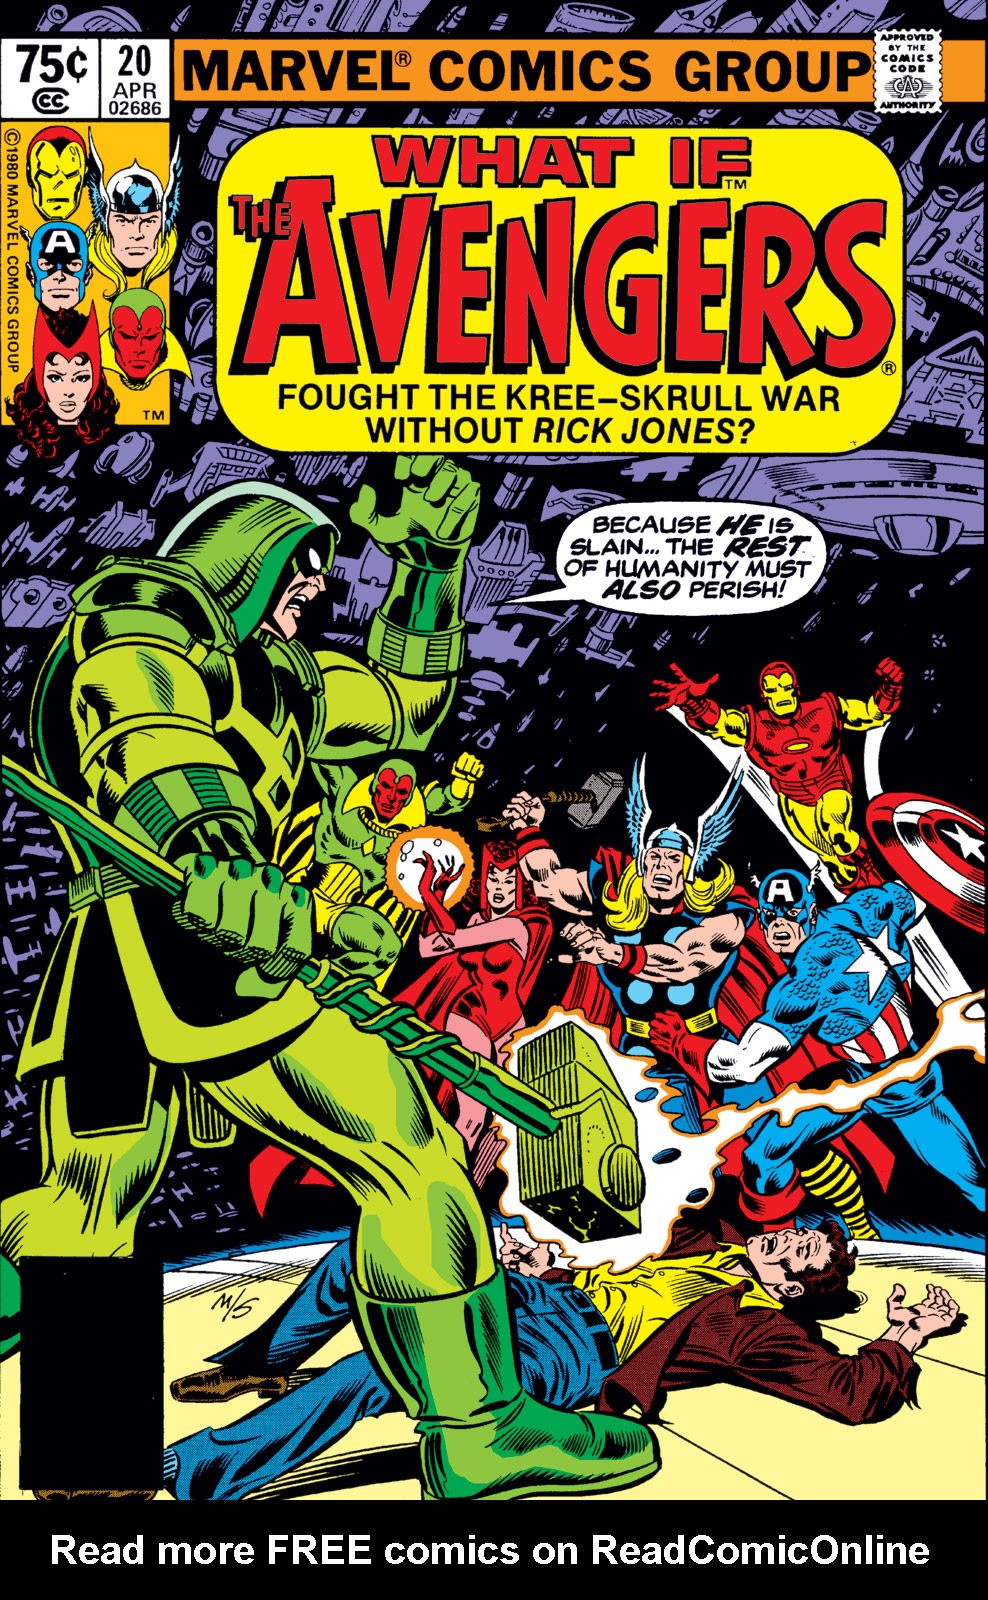 What If? (1977) Issue #20 - The Avengers fought the Kree-Skrull war without Rick Jones #20 - English 1